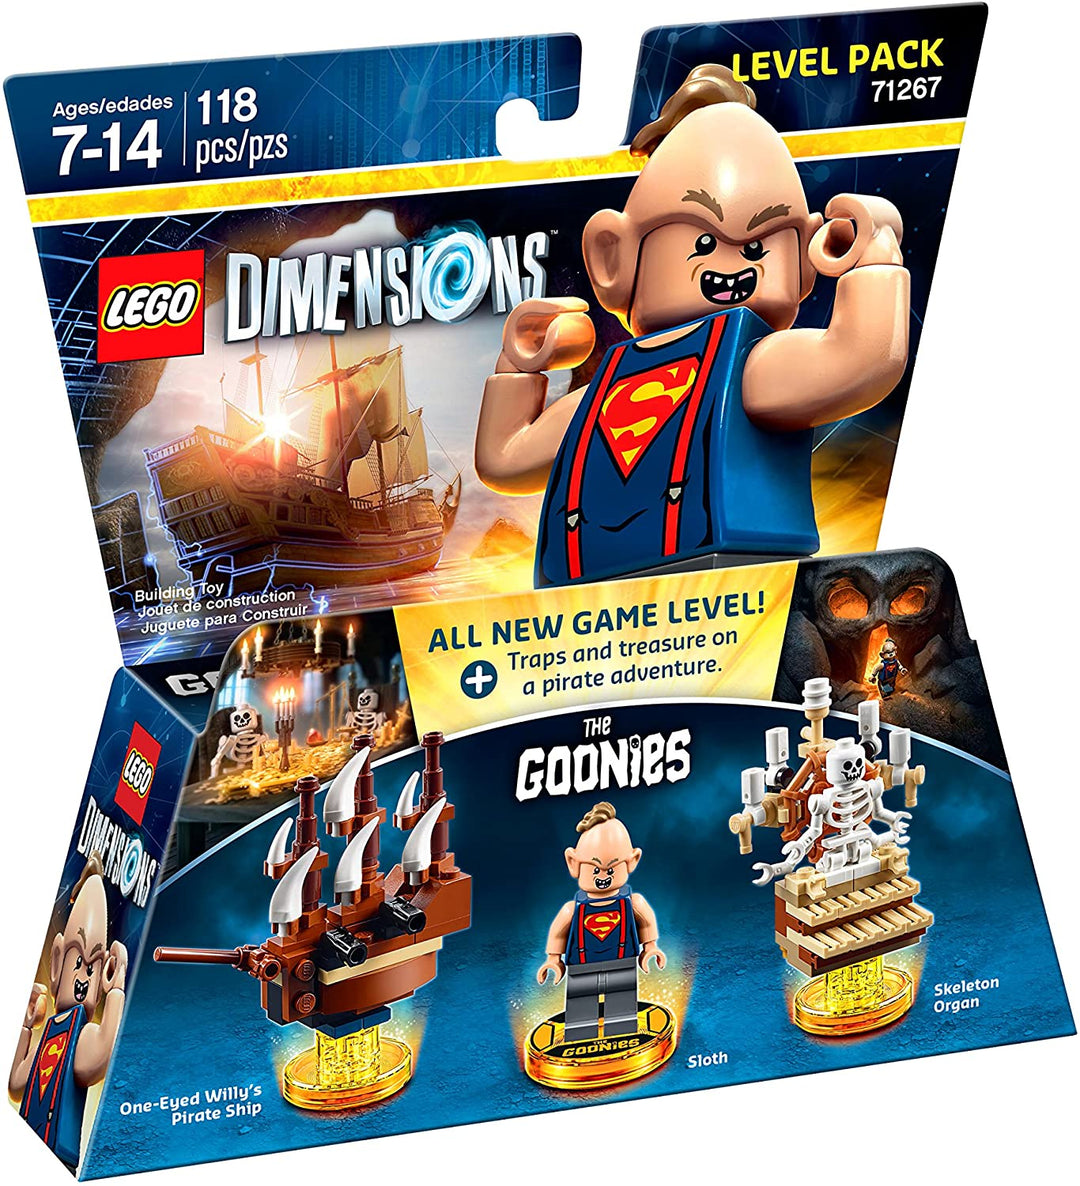 Lego Dimensions: Level Pack – Goonies